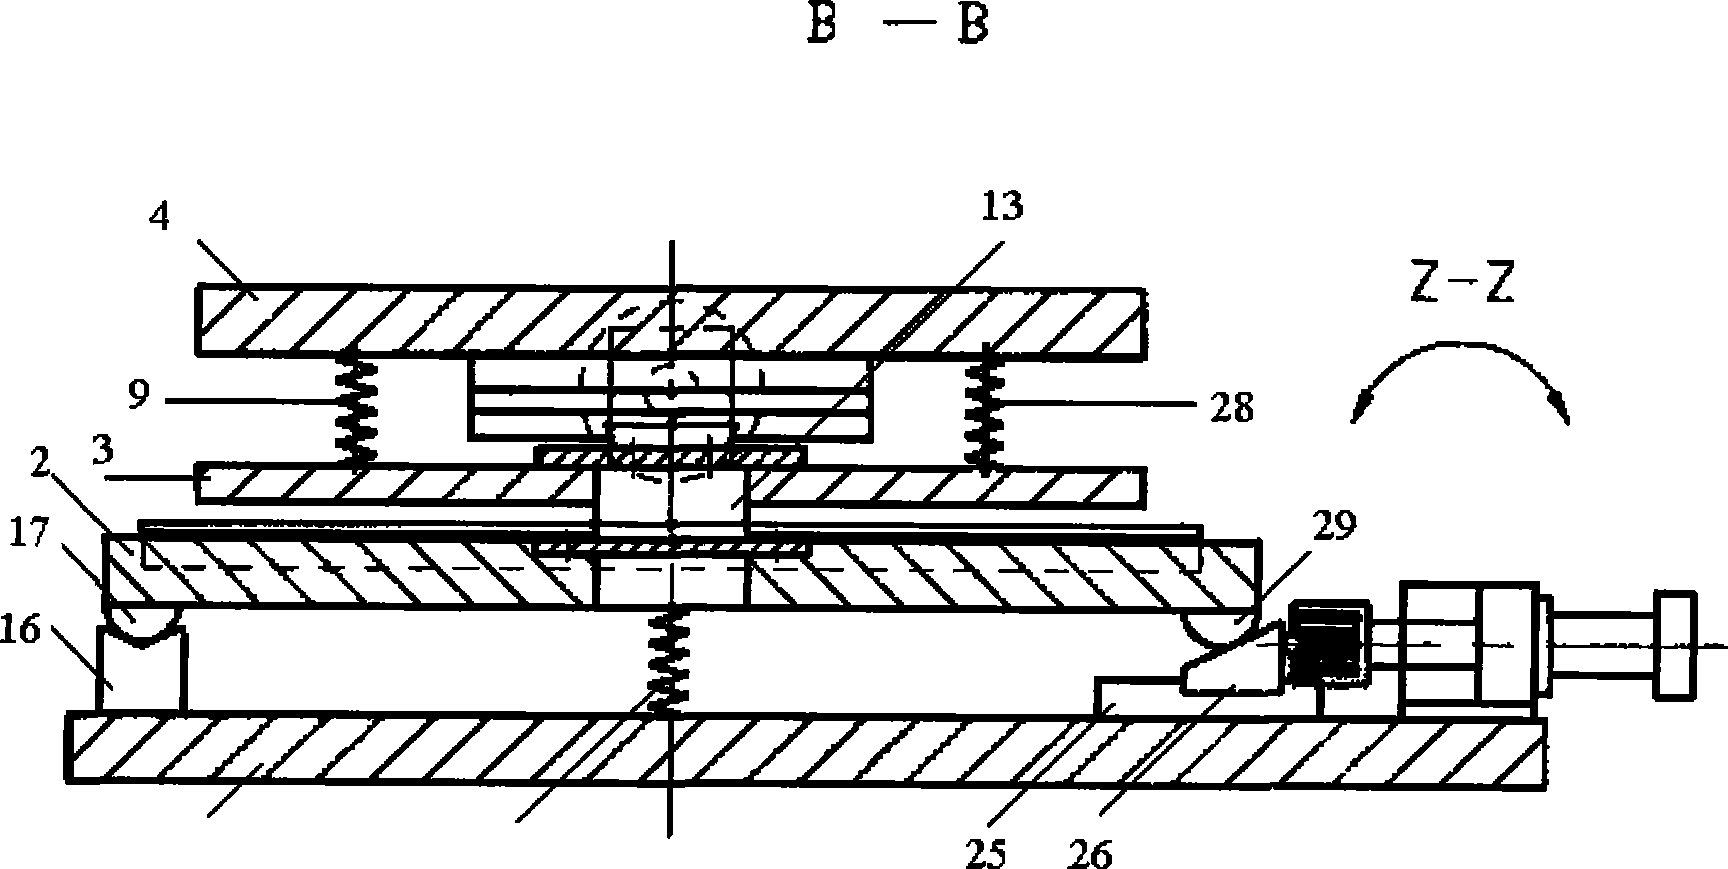 Accurate one-dimensional rotary and two-dimensional tilting table